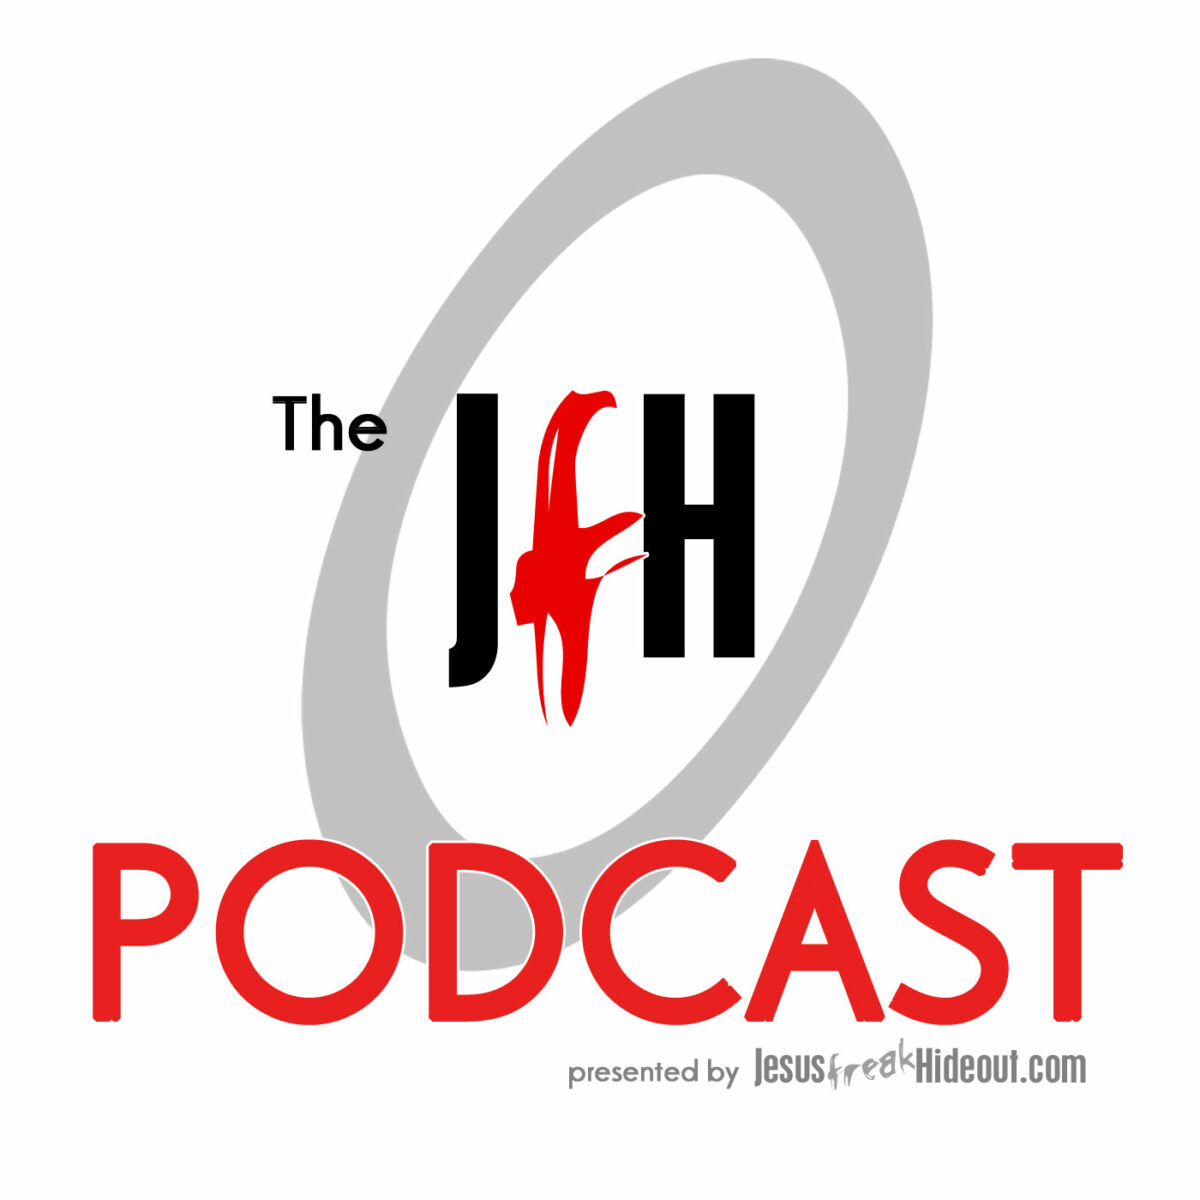 The JFH Podcast 208: 208: Audiofeed Festival X, House Shows, and Rest (feat. Kevin Schlereth)